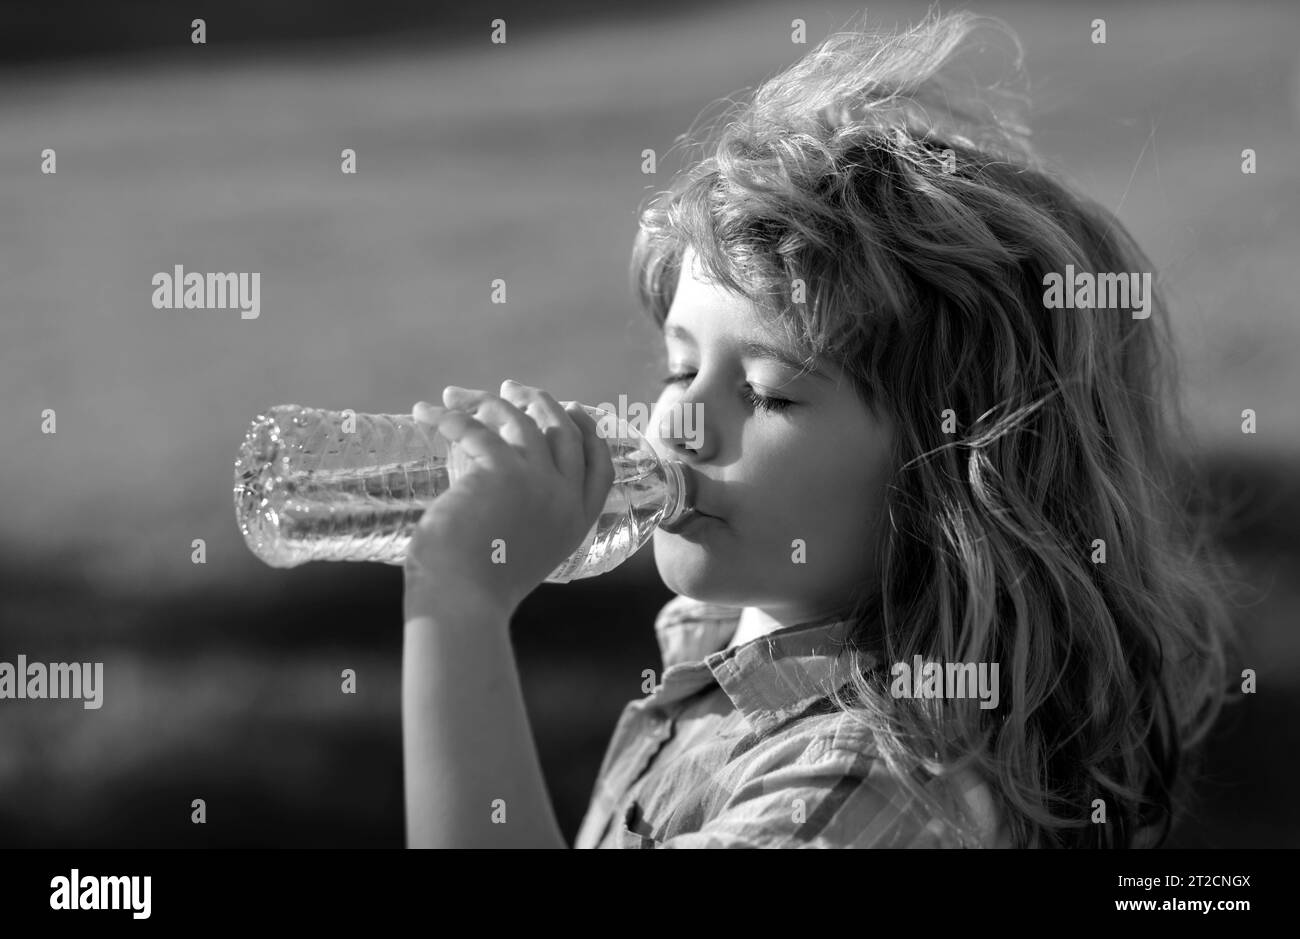 Close up portrait of kid drinking water from pet bottle outdoor. Stock Photo